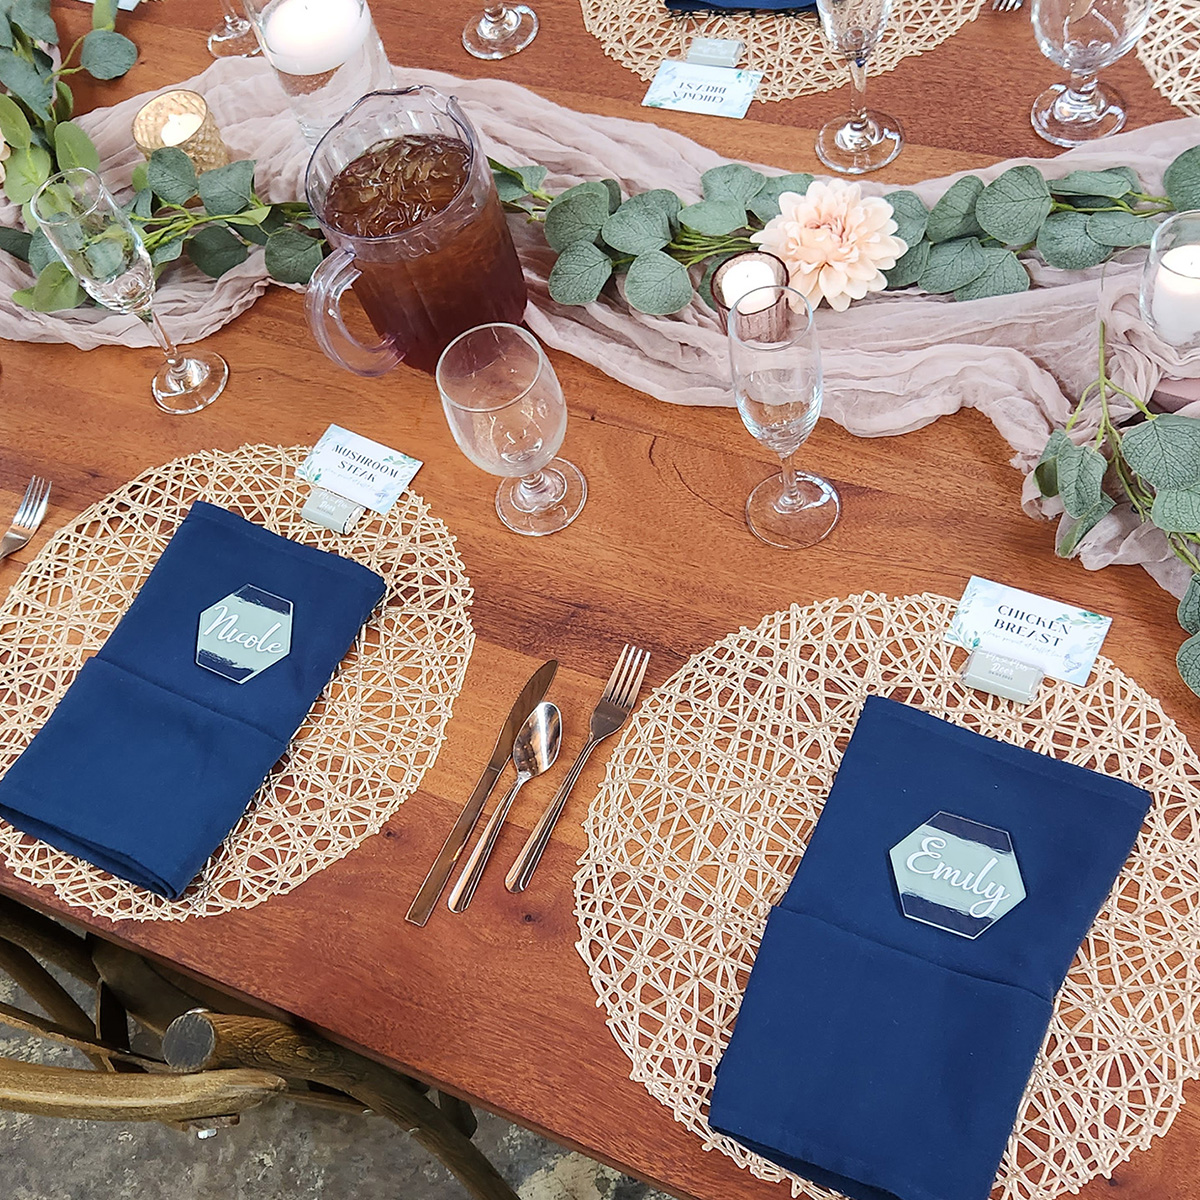 Wooden table set for a wedding